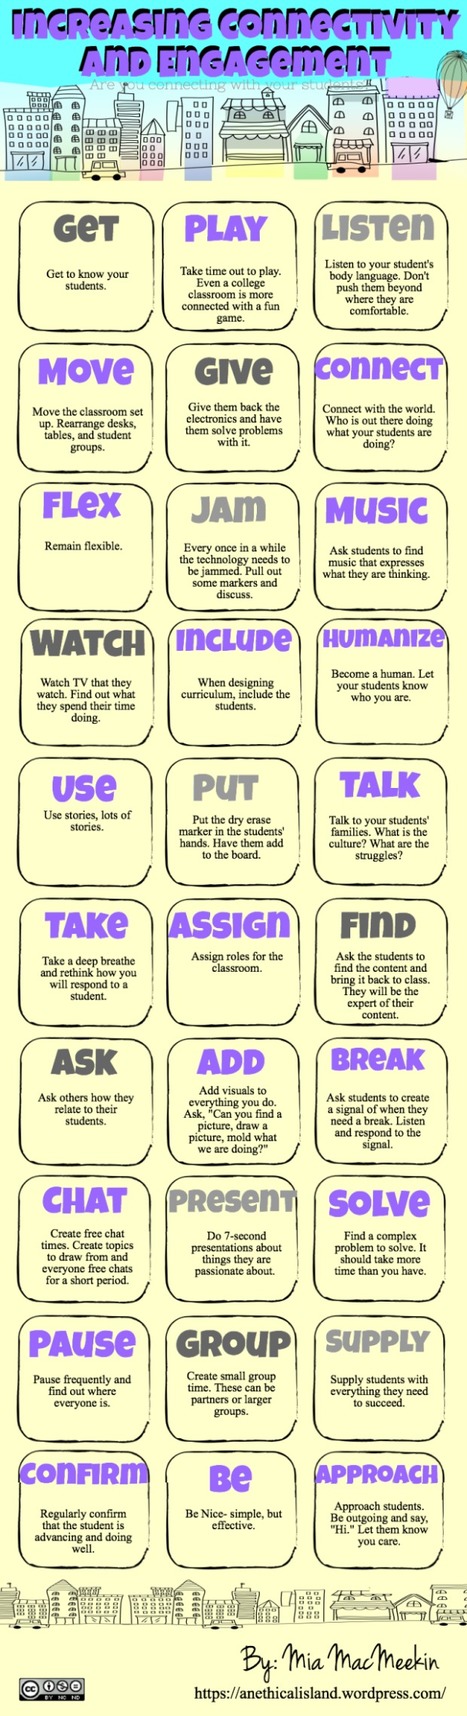 30 Simple Ways To Connect With Students | Digital Delights - Digital Tribes | Scoop.it